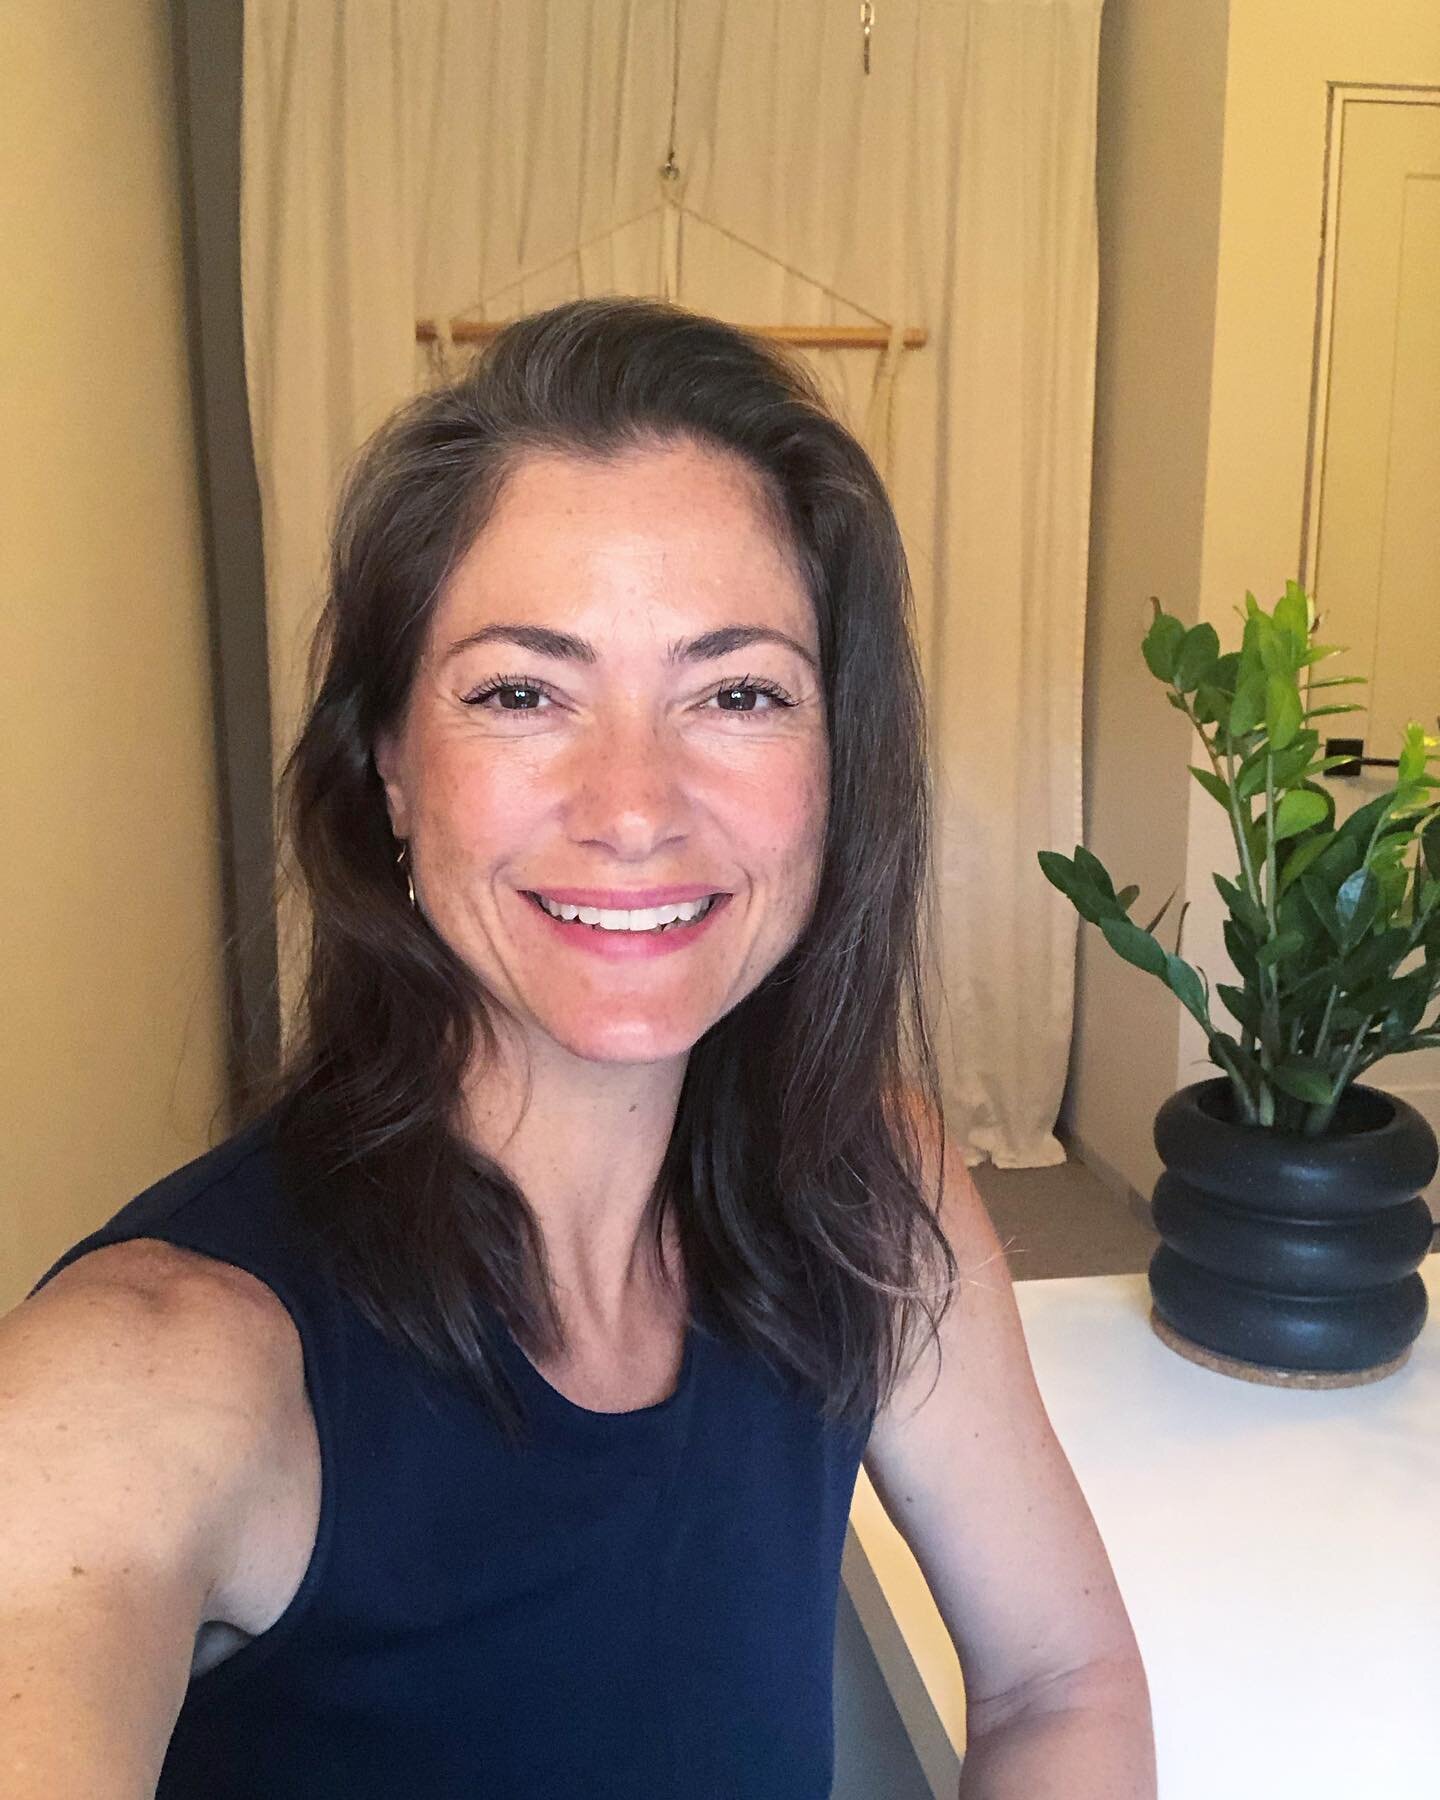 Hey! Coach Catherine here. Can I help you build the foundation for a happier, healthier, more joyful life?

There are only 2 weeks left to join my next Women&rsquo;s Coaching Circle, from September 14 to December 1!

Your daily habits shape your life